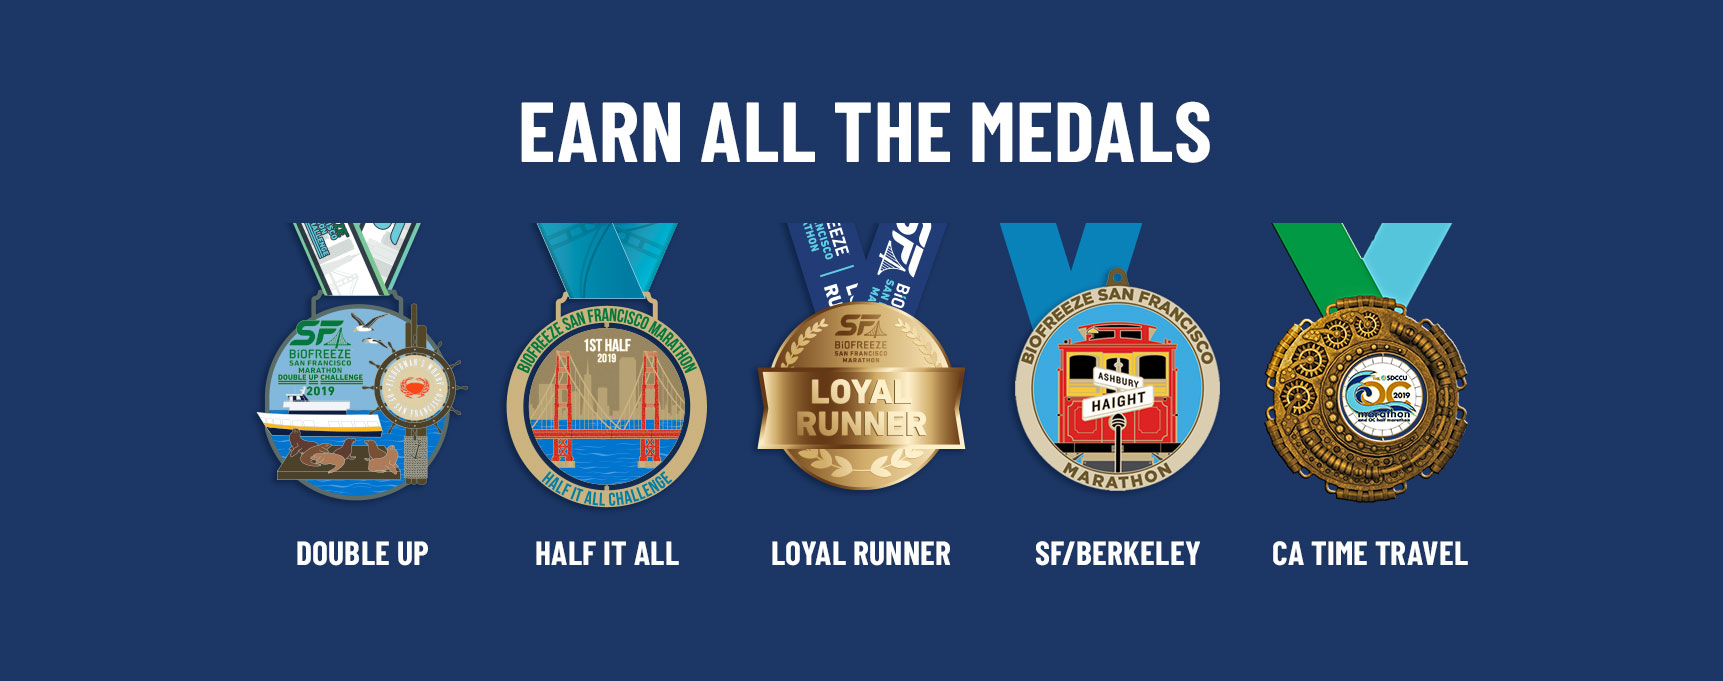 2 and 5 Per Pack-Great for Marathon Awards Running Awards Half Marathon Medals Races